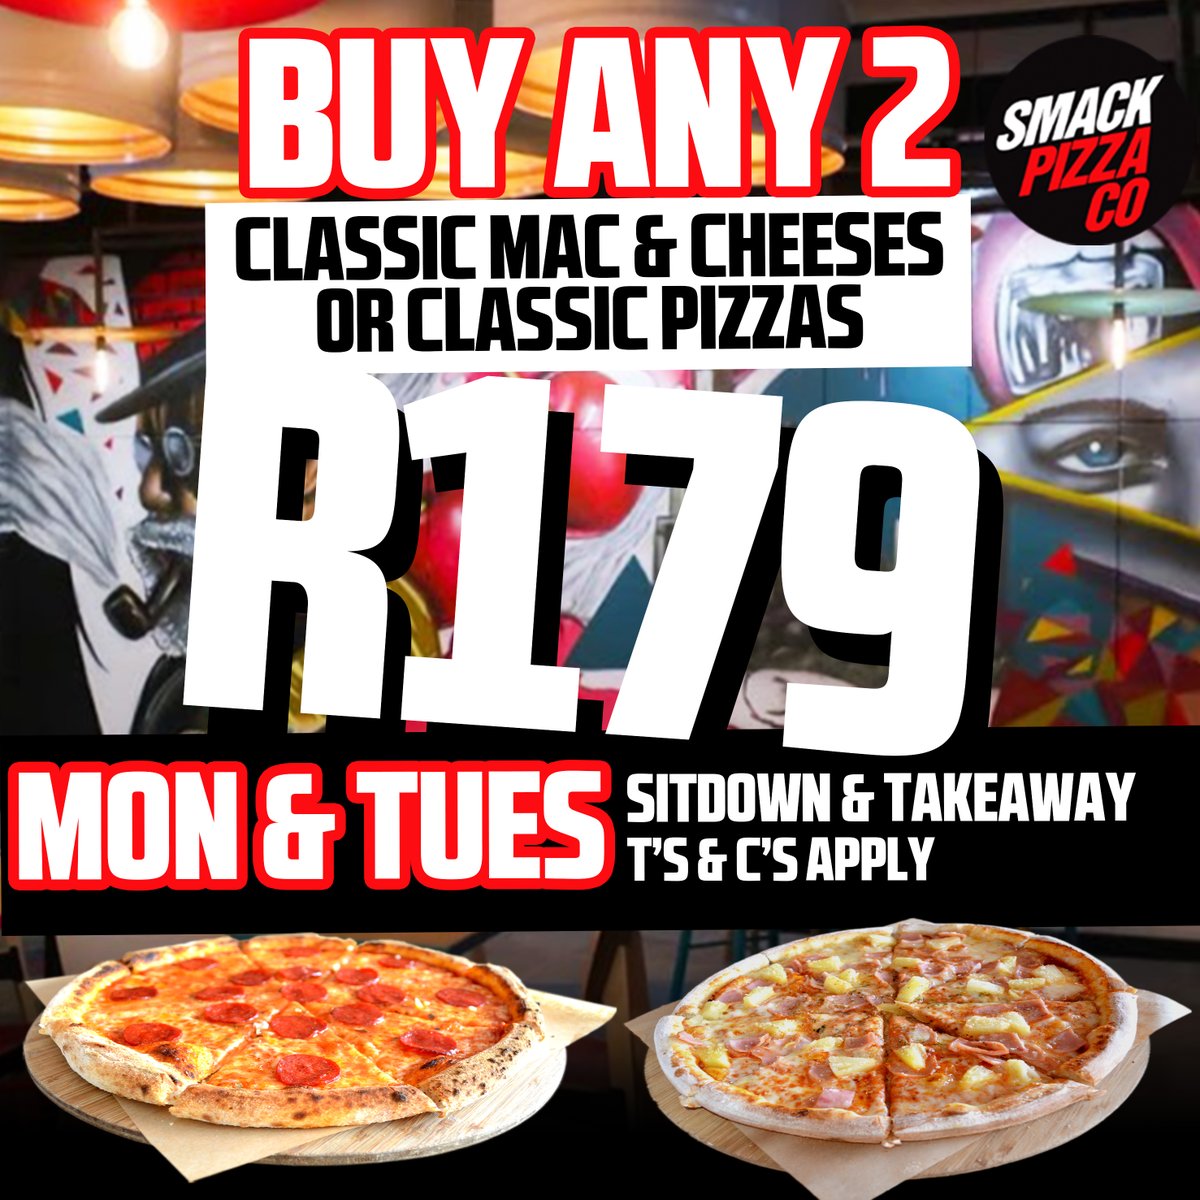 SMACK ATTACK MONDAYS & TUESDAYS!
Buy any 2 Classic Pizzas or Mac and Cheese ONLY for R179!

✔️Classic
✔️Rustic Classic
✔️Chicken
✔️Pepperoni
✔️Smoke ‘n Shrooms
✔️Hawaiian
✔️The Greek (Vegetarian)
✔️Buzz Kill
✔️Johnny Apple Pie

#Smack #pizza #tuesdayspecial #mondayspecial